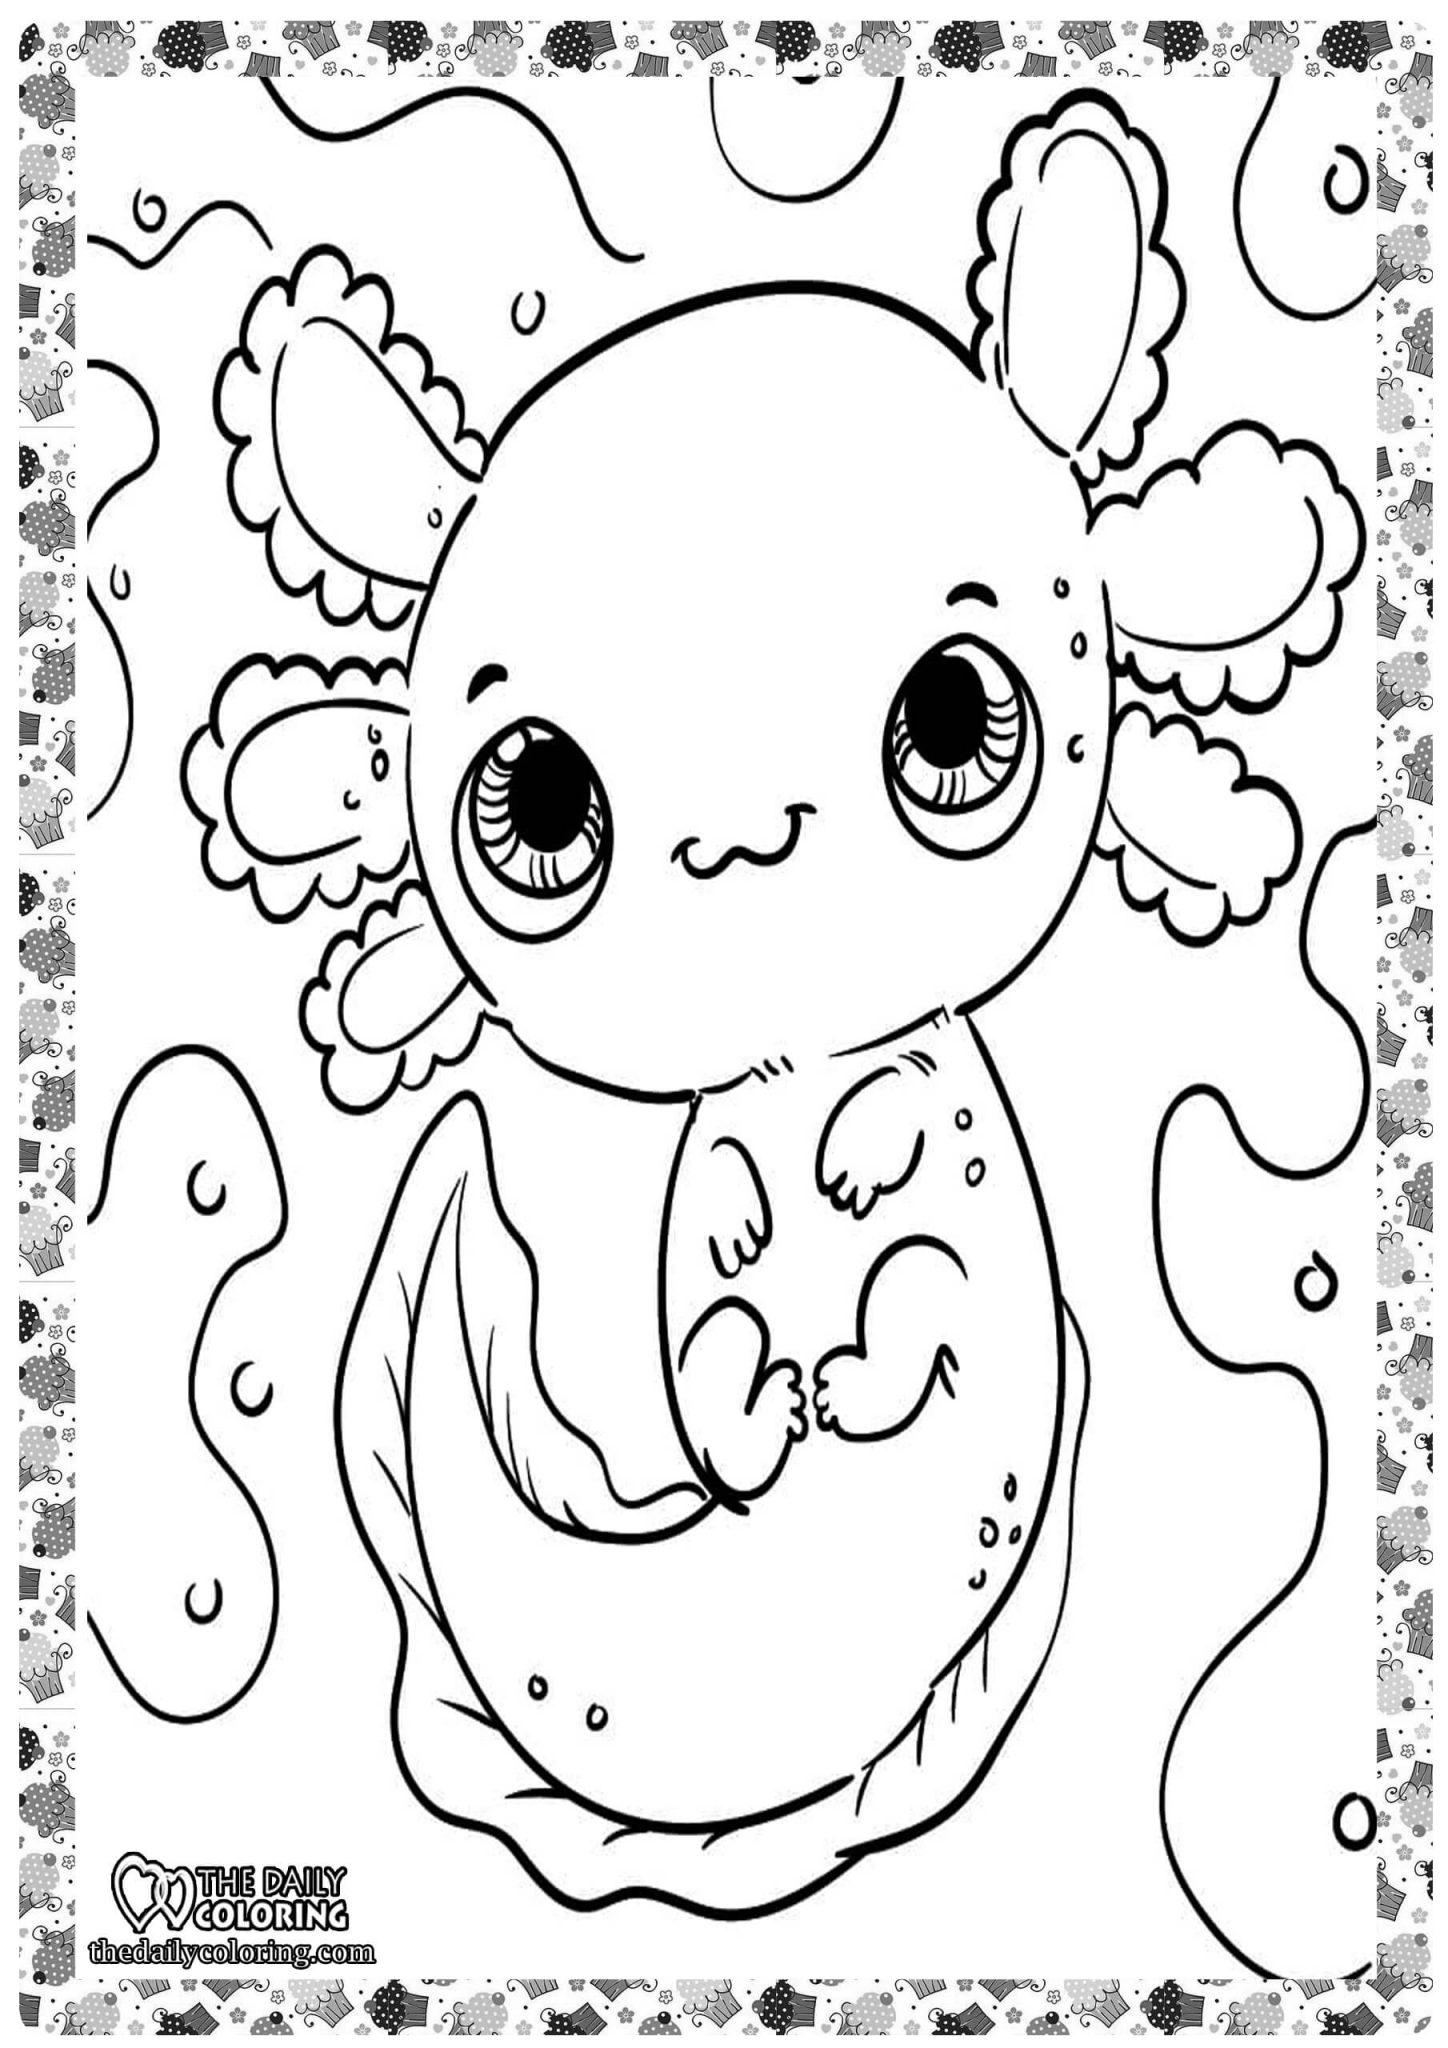 Axolotl Printable Coloring Page Free Printable Coloring Pages For | The